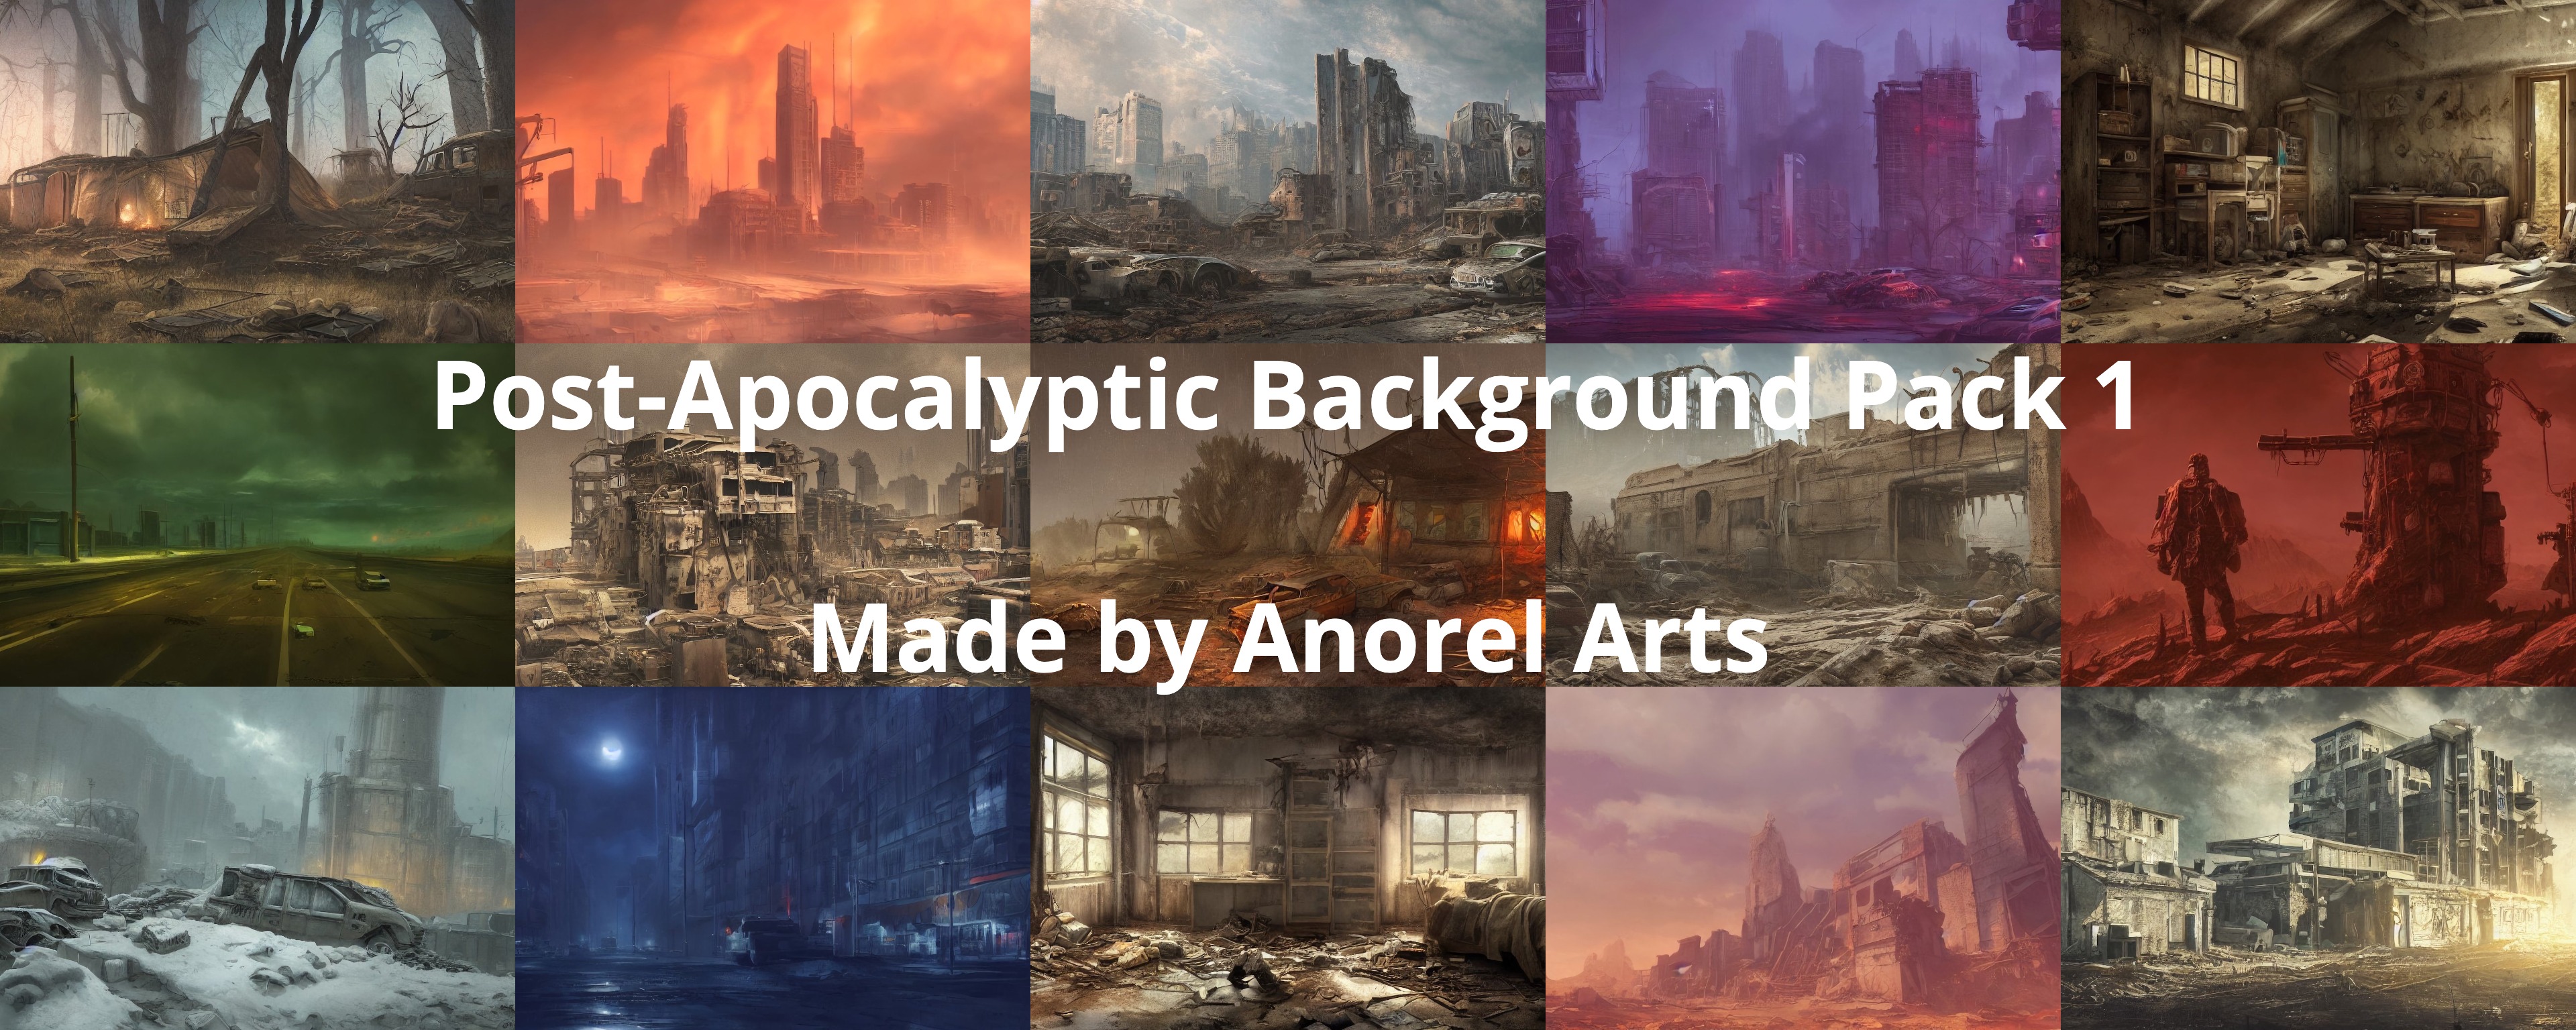 Post-Apocalyptic Background Pack 1